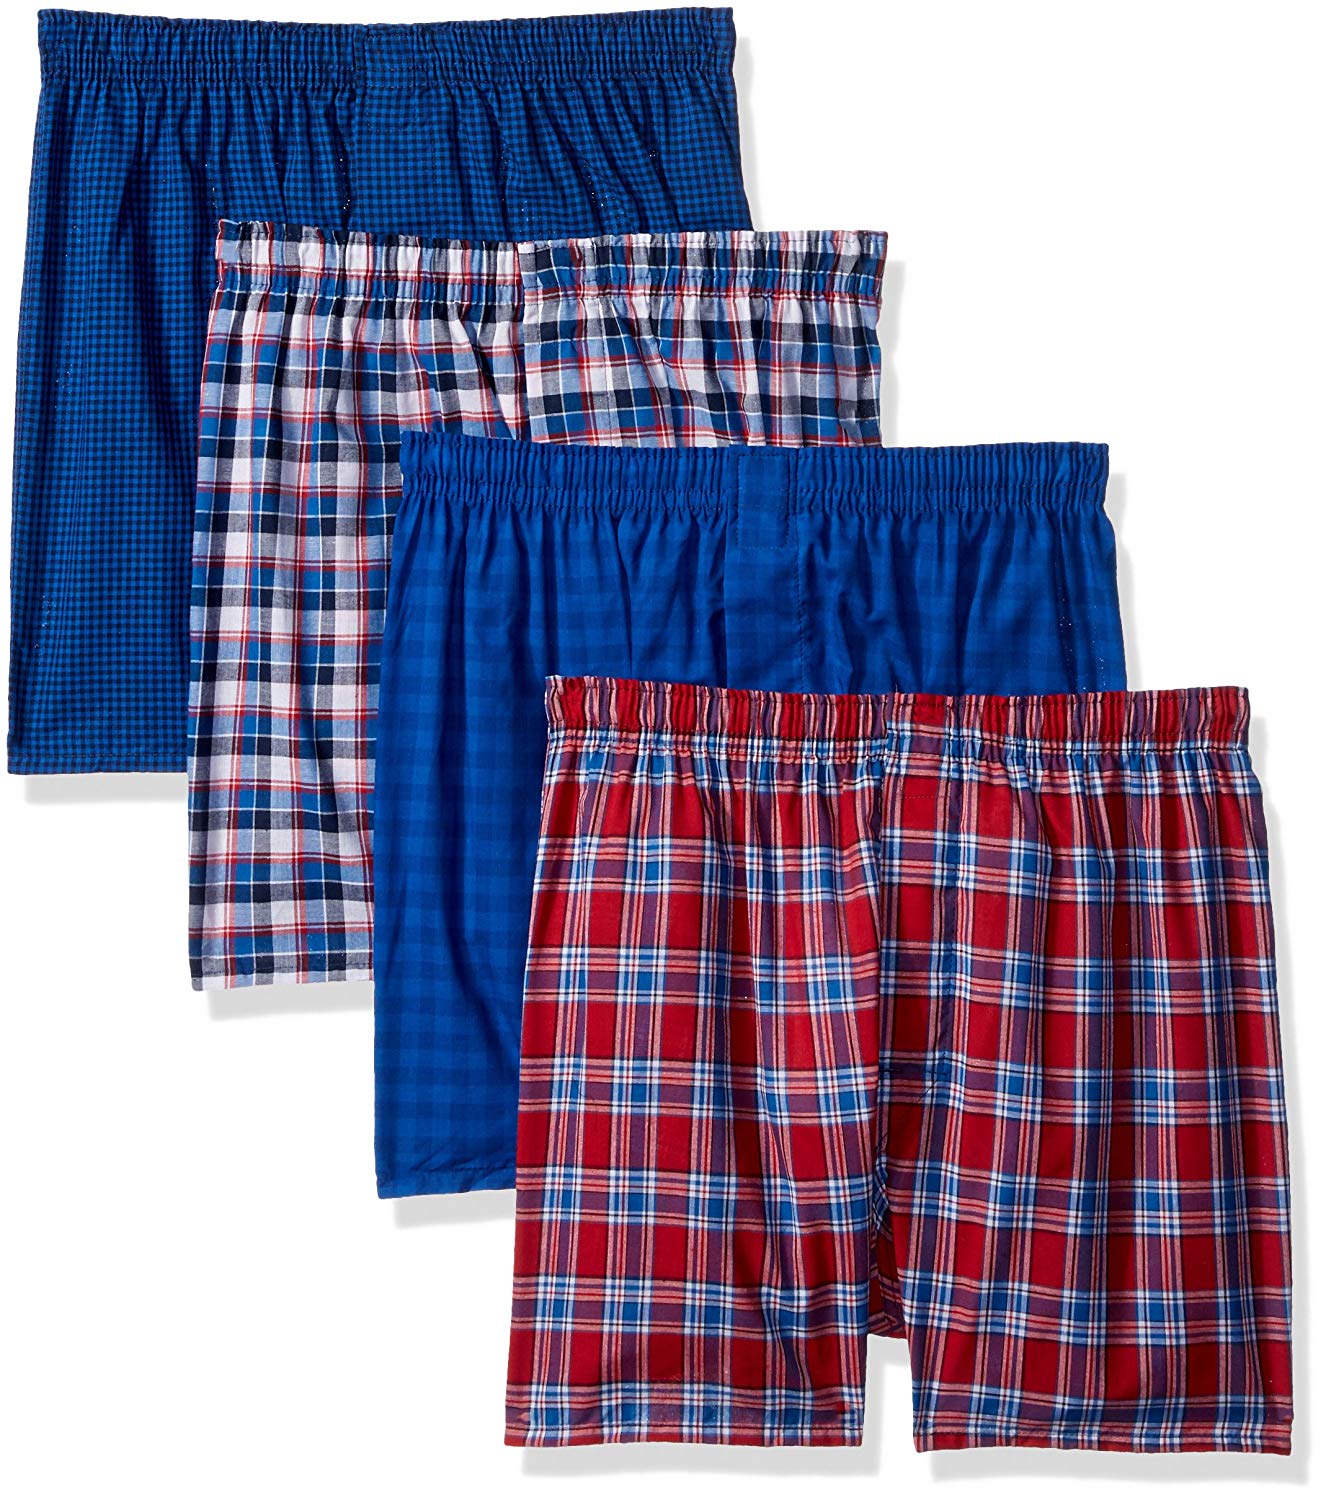 Hanes Men's 4-Pack ComfortBlend Woven Boxers with FreshIQ,, Assorted ...